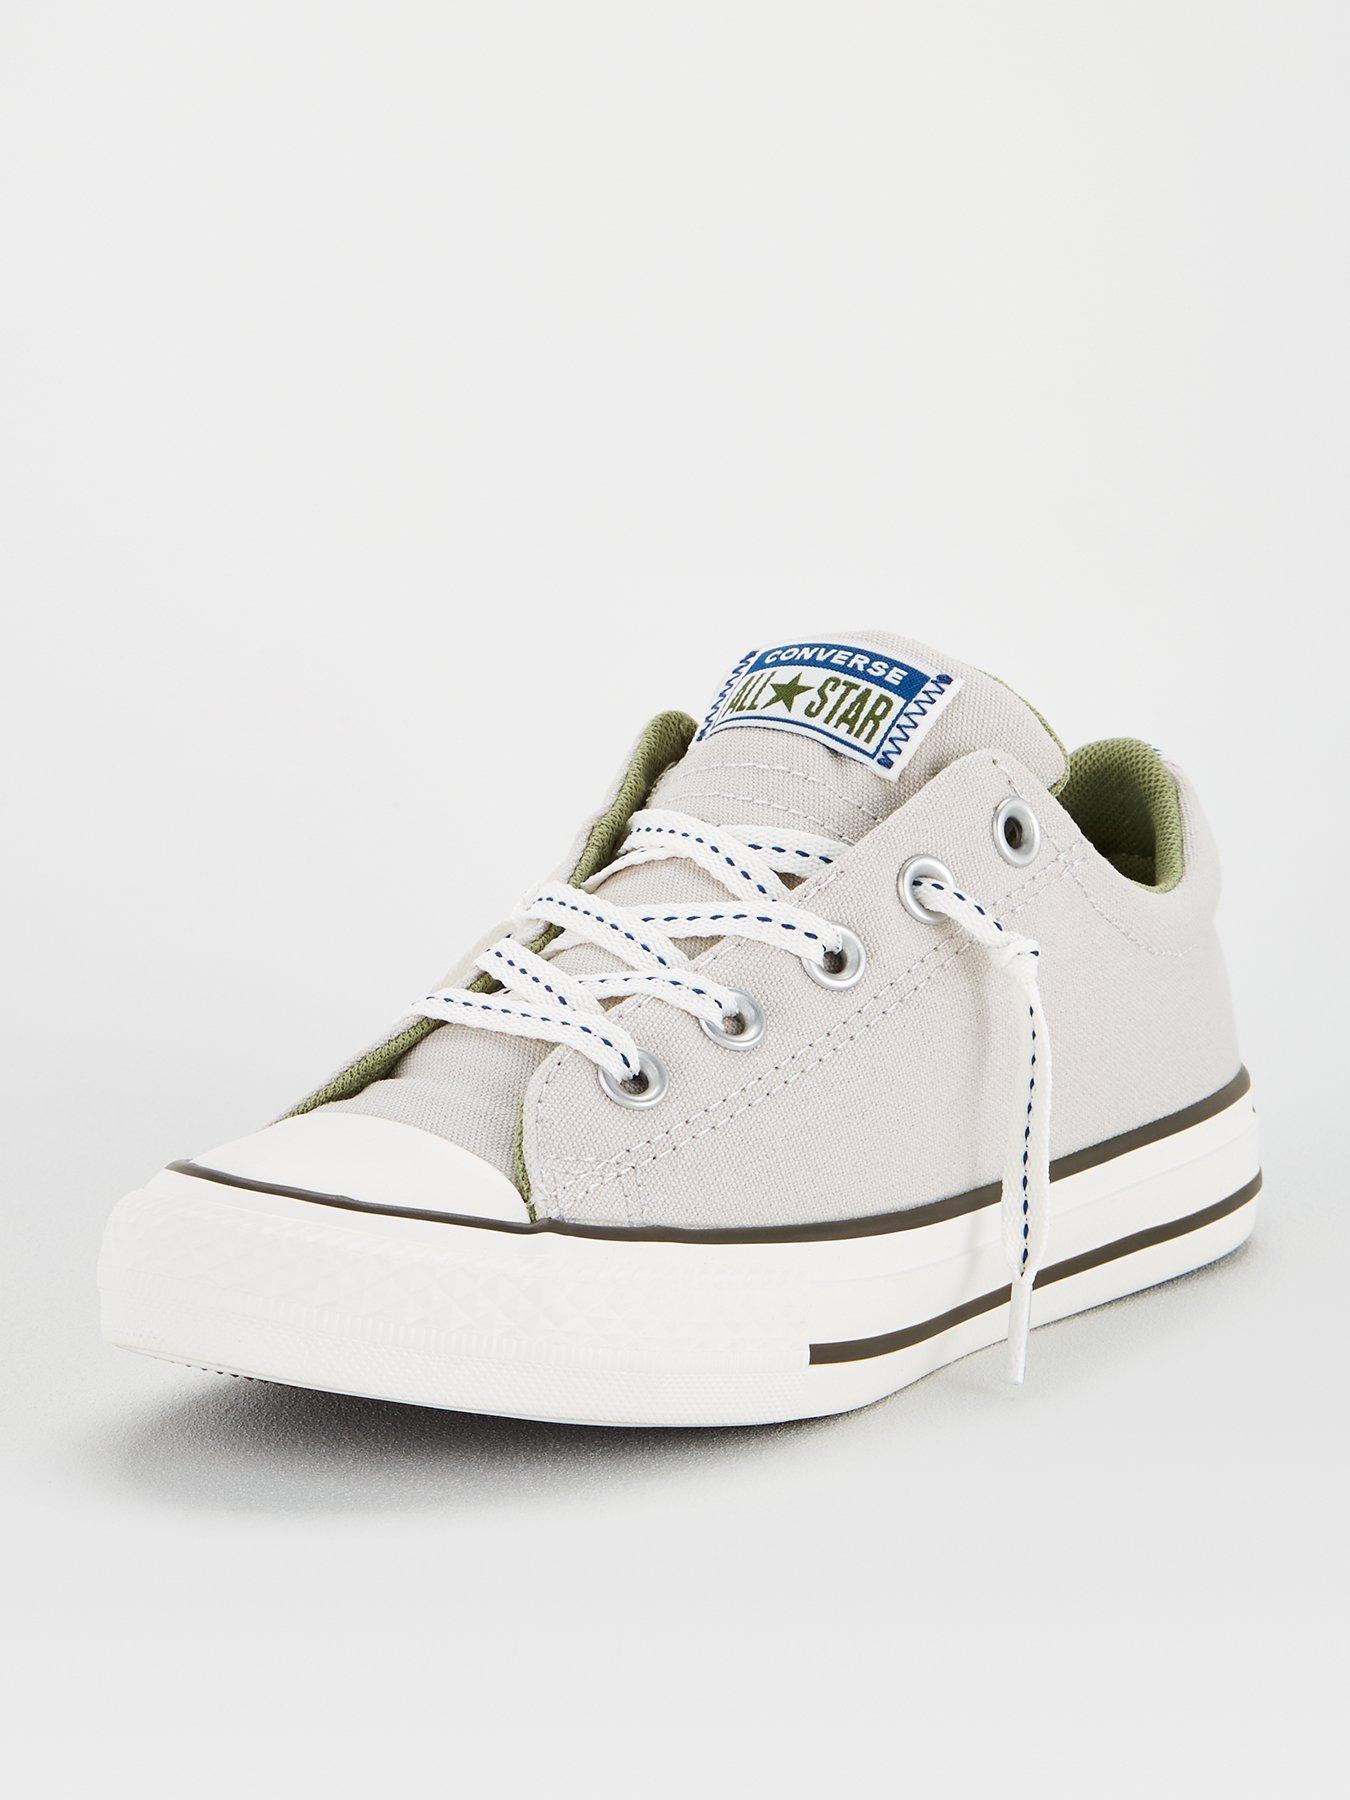 Converse Chuck Taylor All Star Street Slip Childrens Trainers - Grey |  very.co.uk